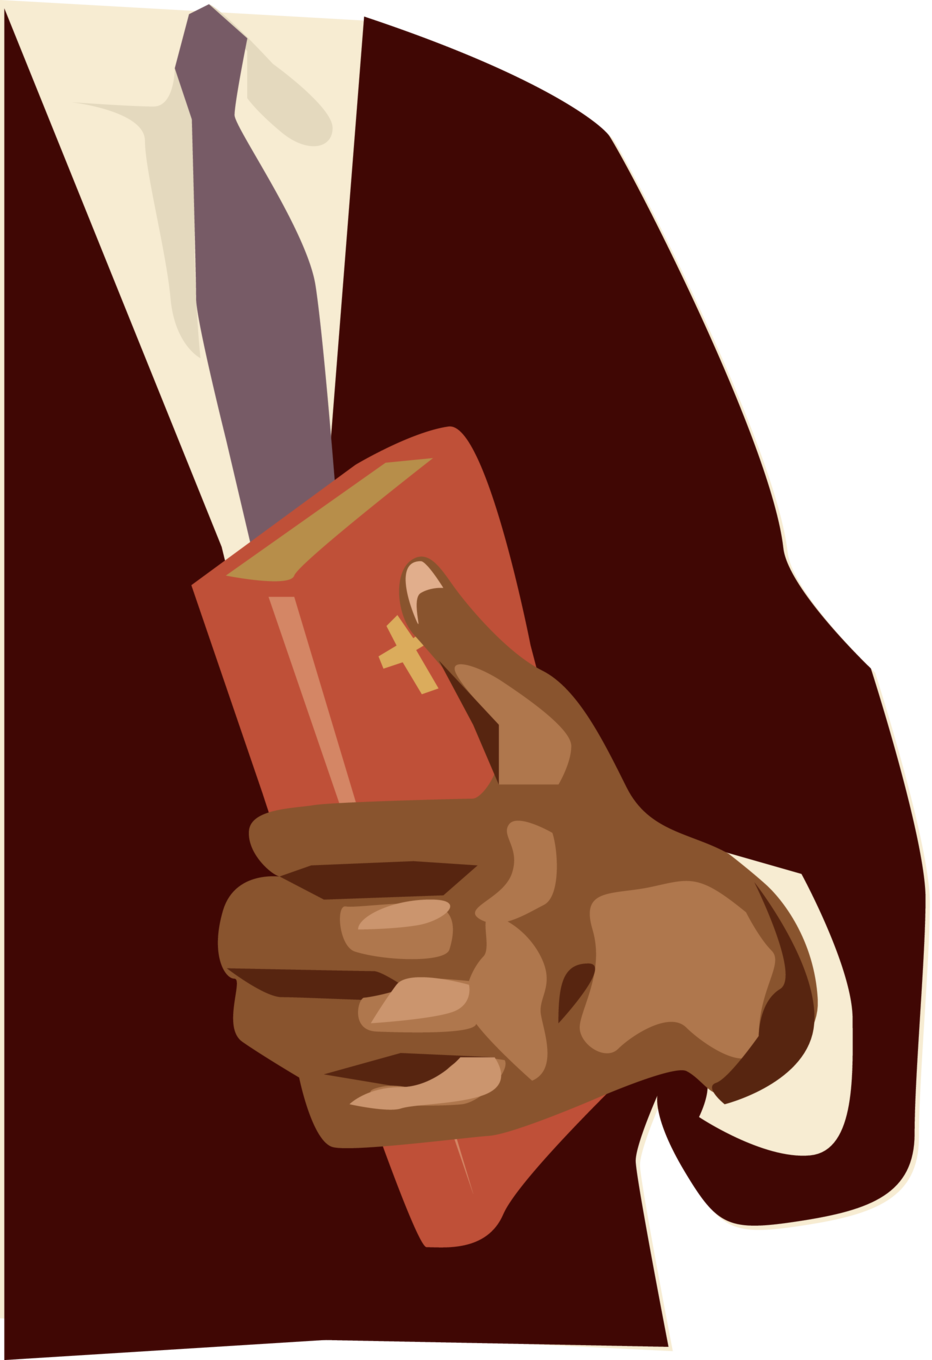 clipart images pastor